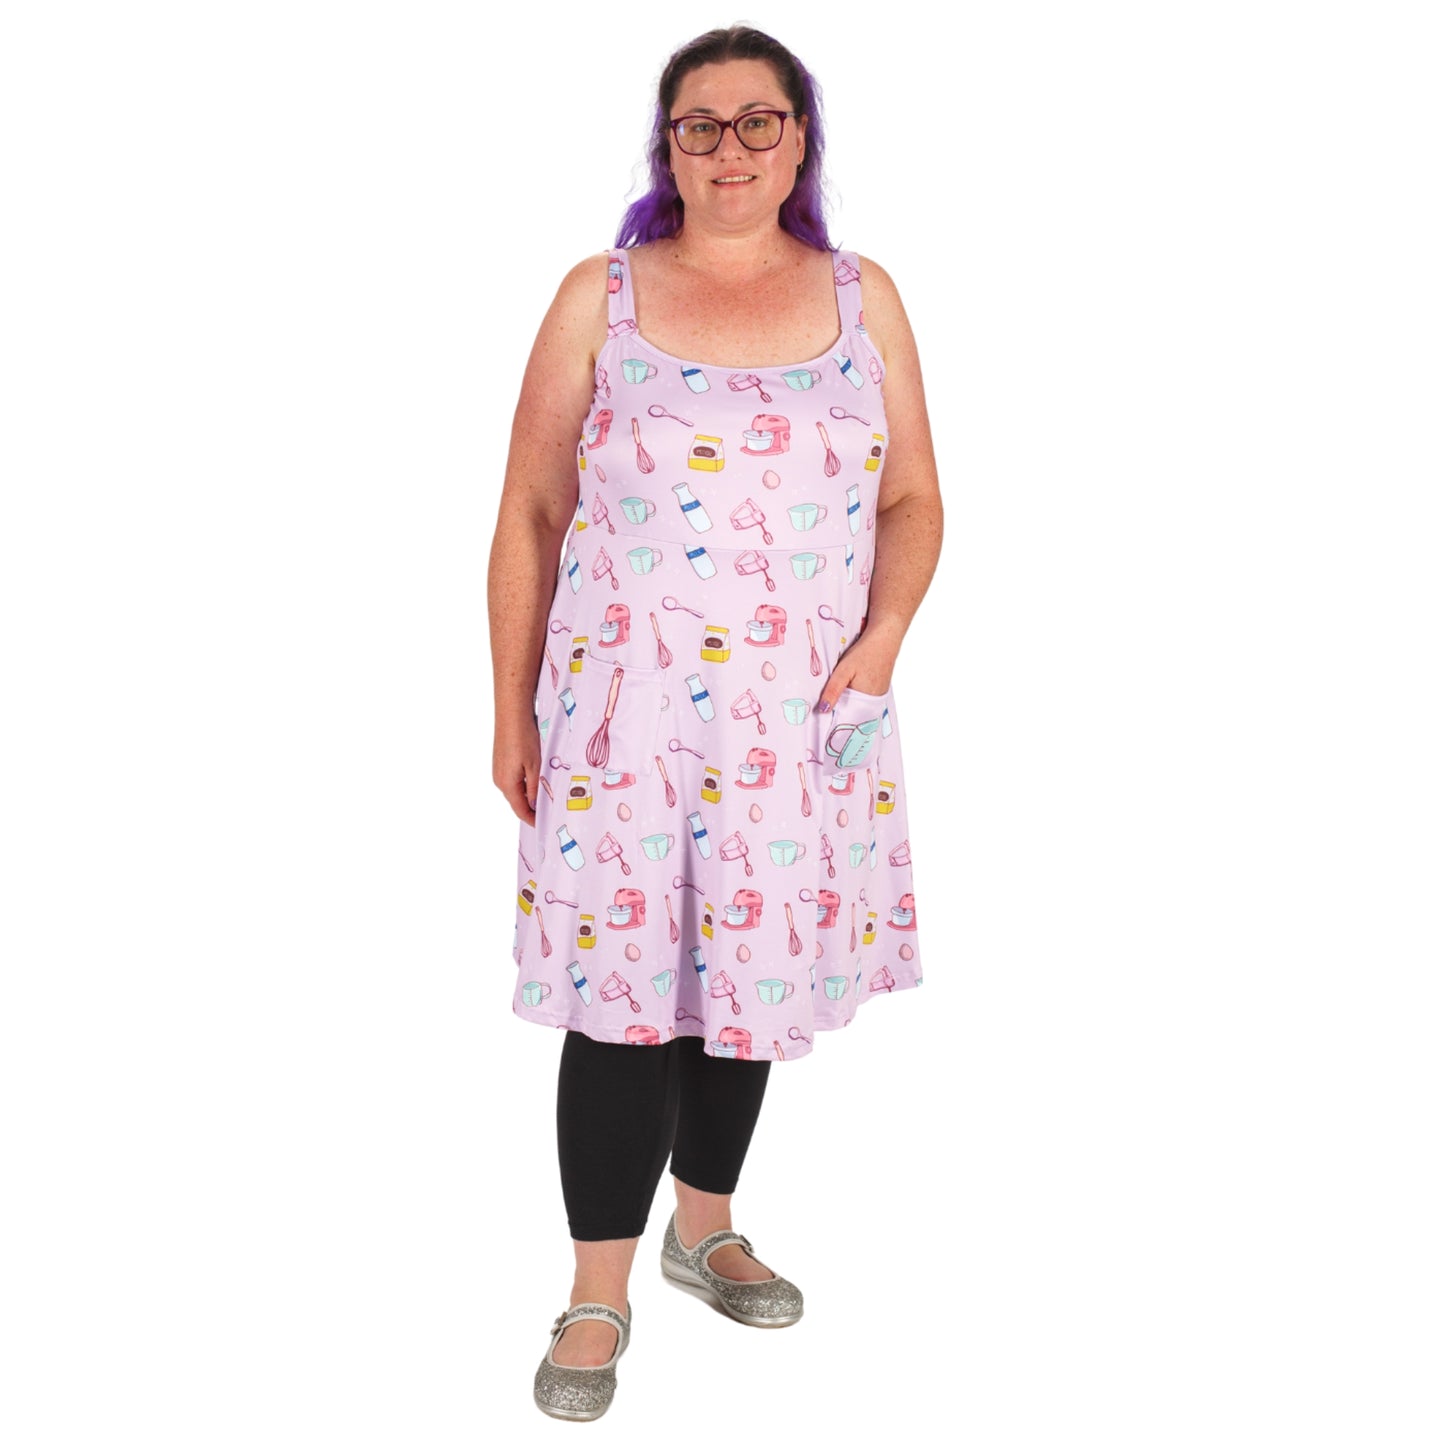 Bakery Pinafore by RainbowsAndFairies.com.au (Cooking - Whisk - Mixer - Dress With Pockets - Pinny - Kitsch - Rockabilly - Vintage Inspired) - SKU: CL_PFORE_BAKER_ORG - Pic-05